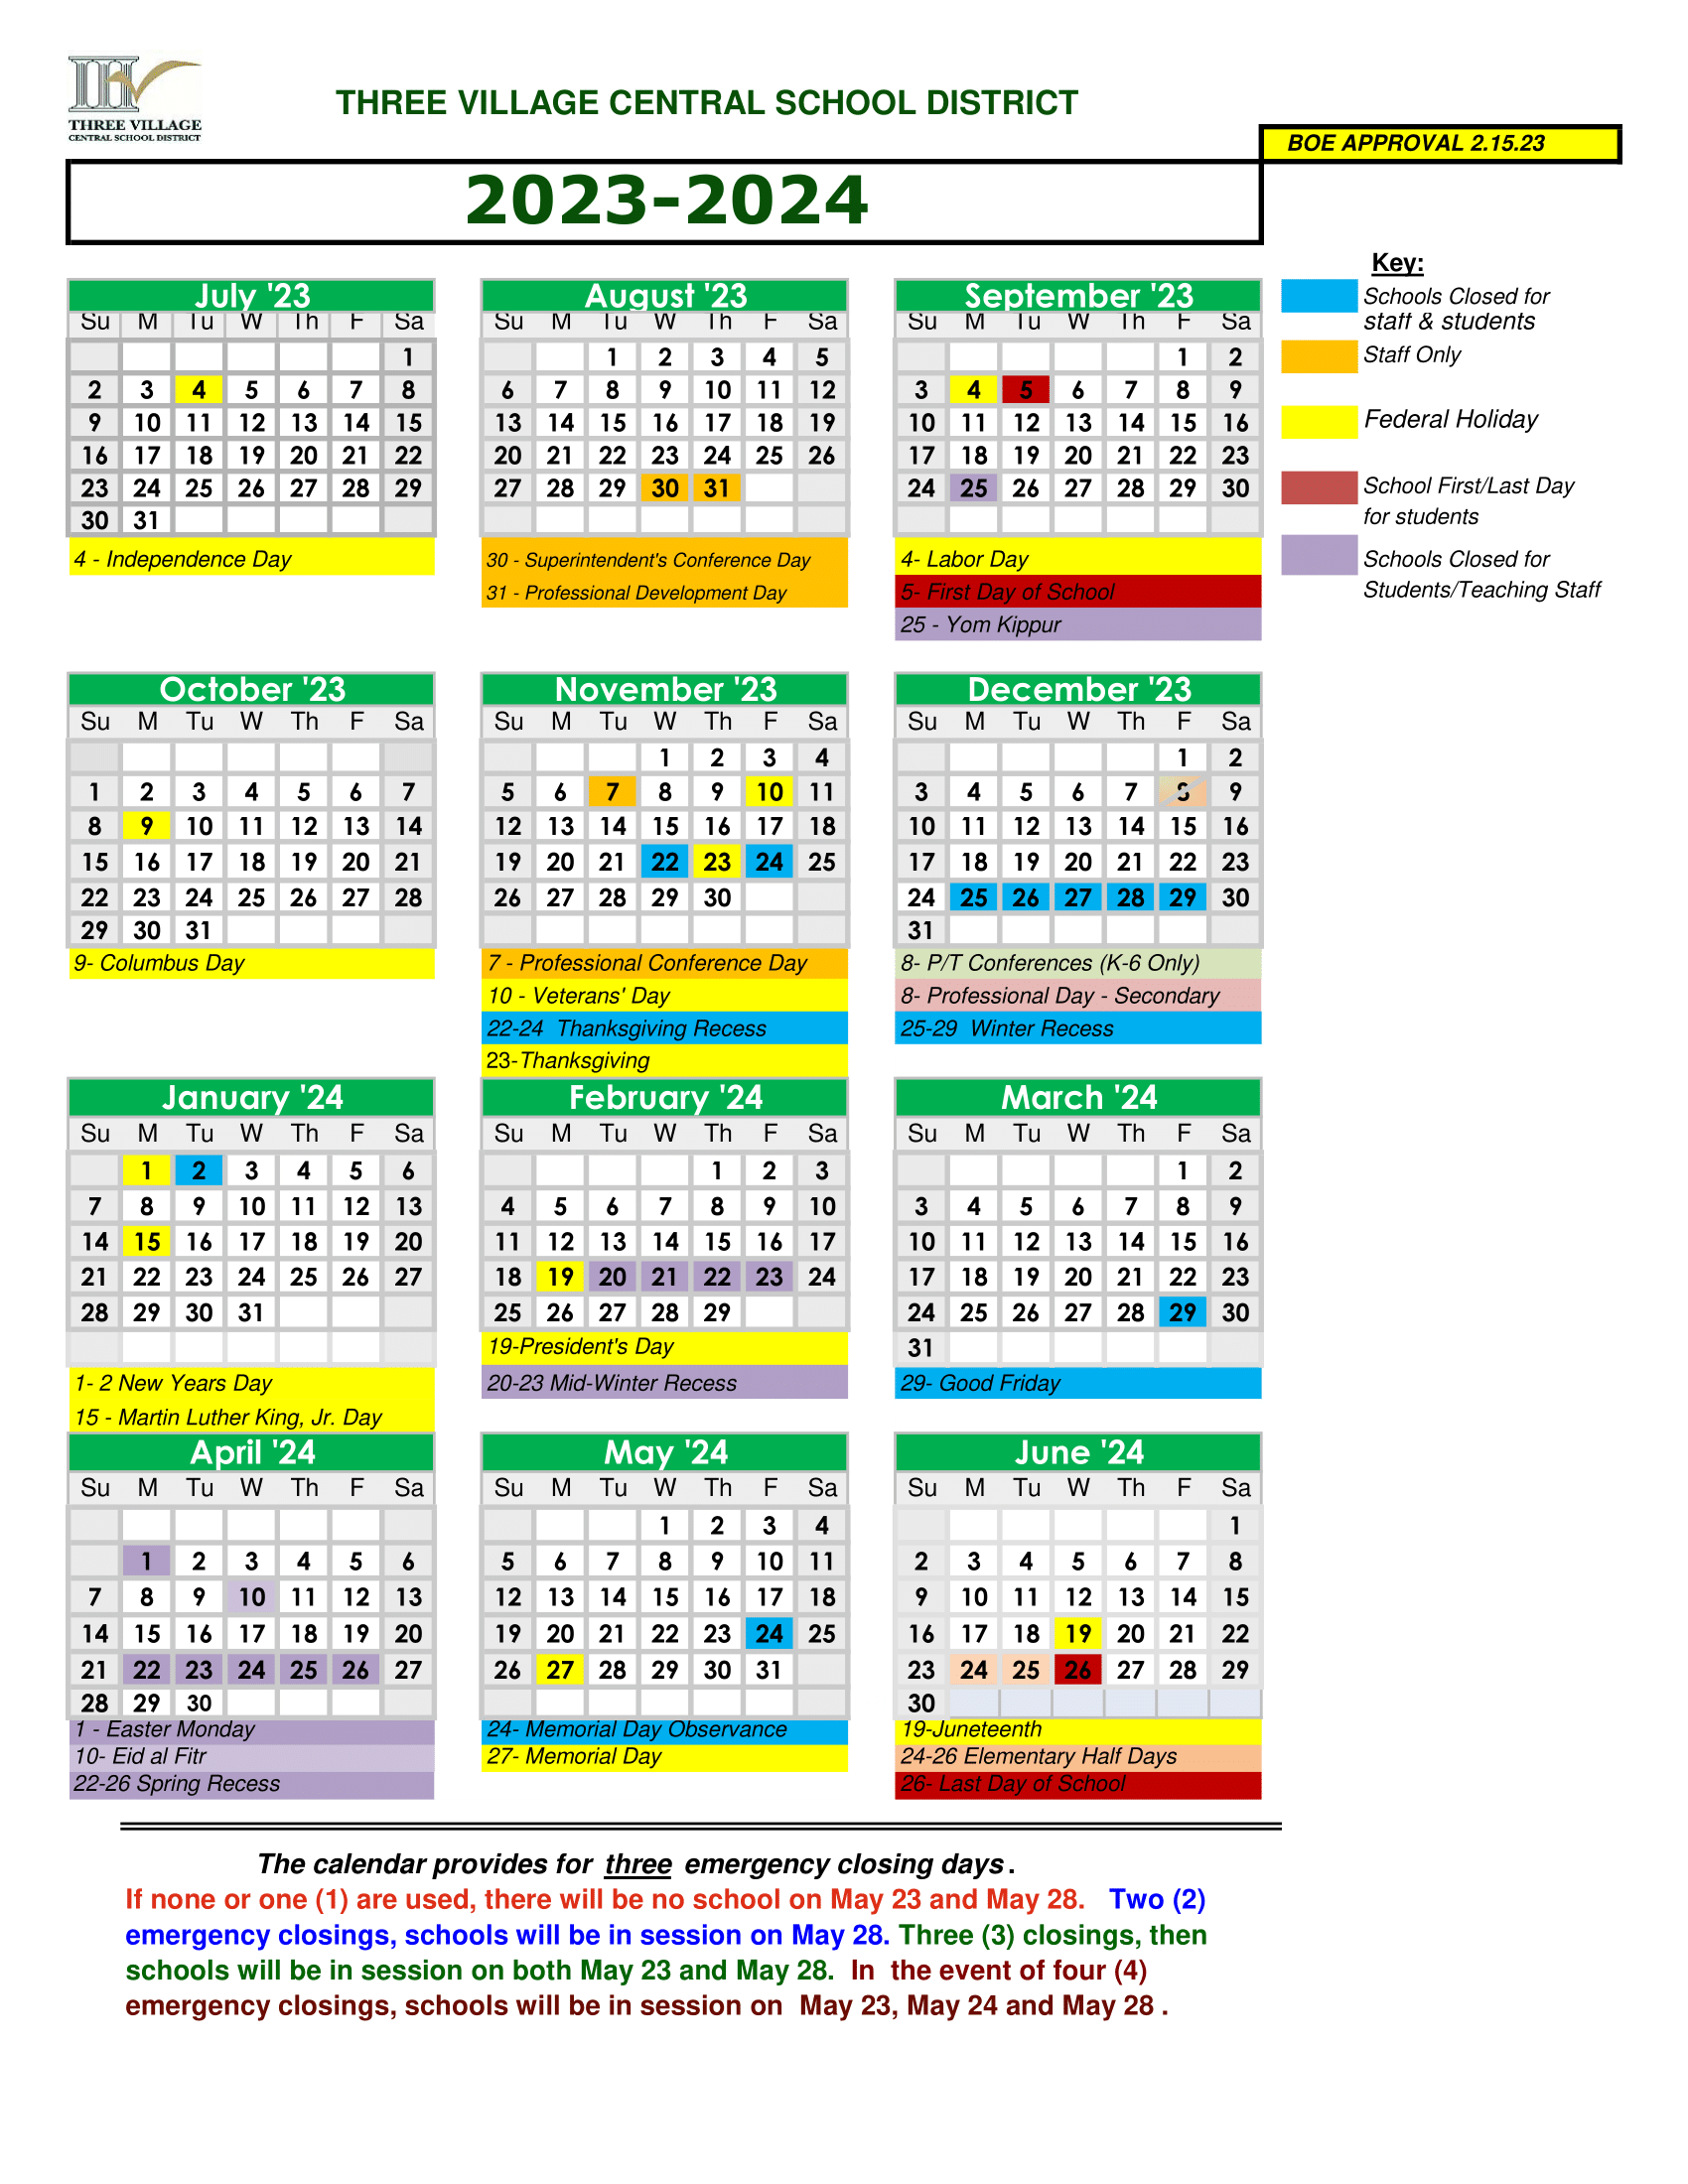 The district calender for this school year